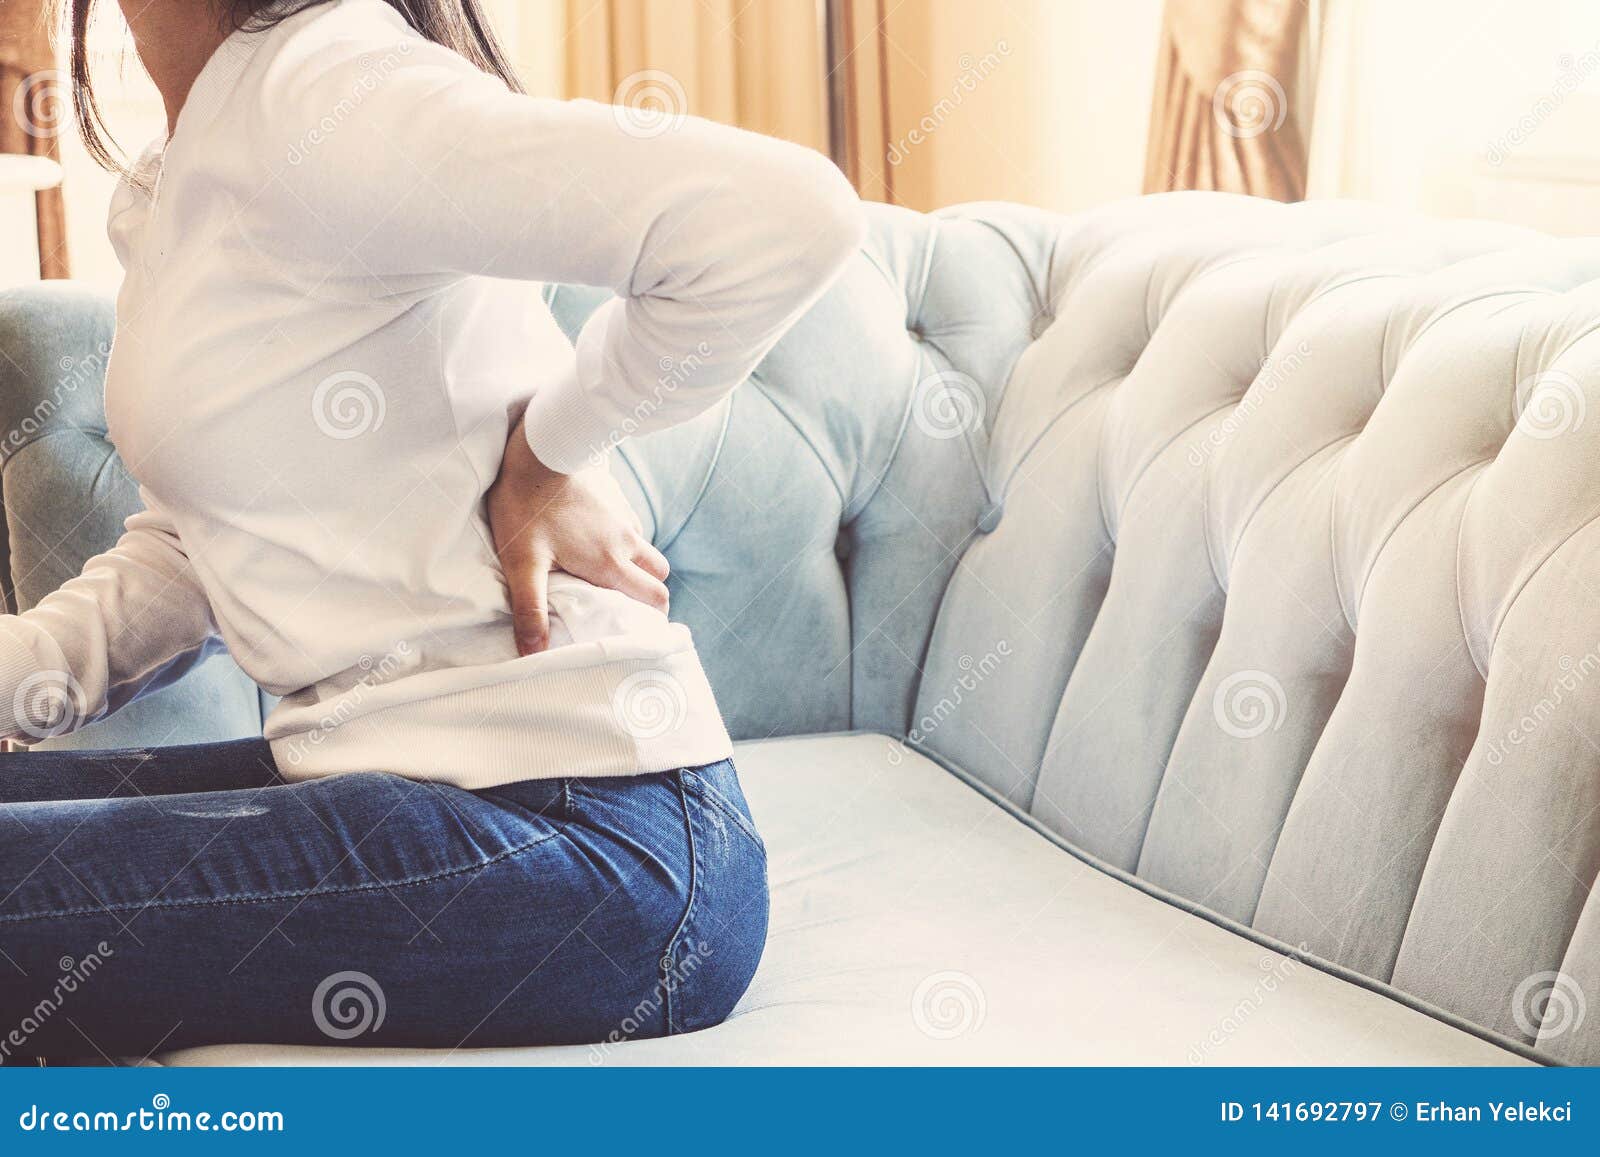 female hands touching back pain sitting in sofa resting at home. young woman low waist hurt massage.